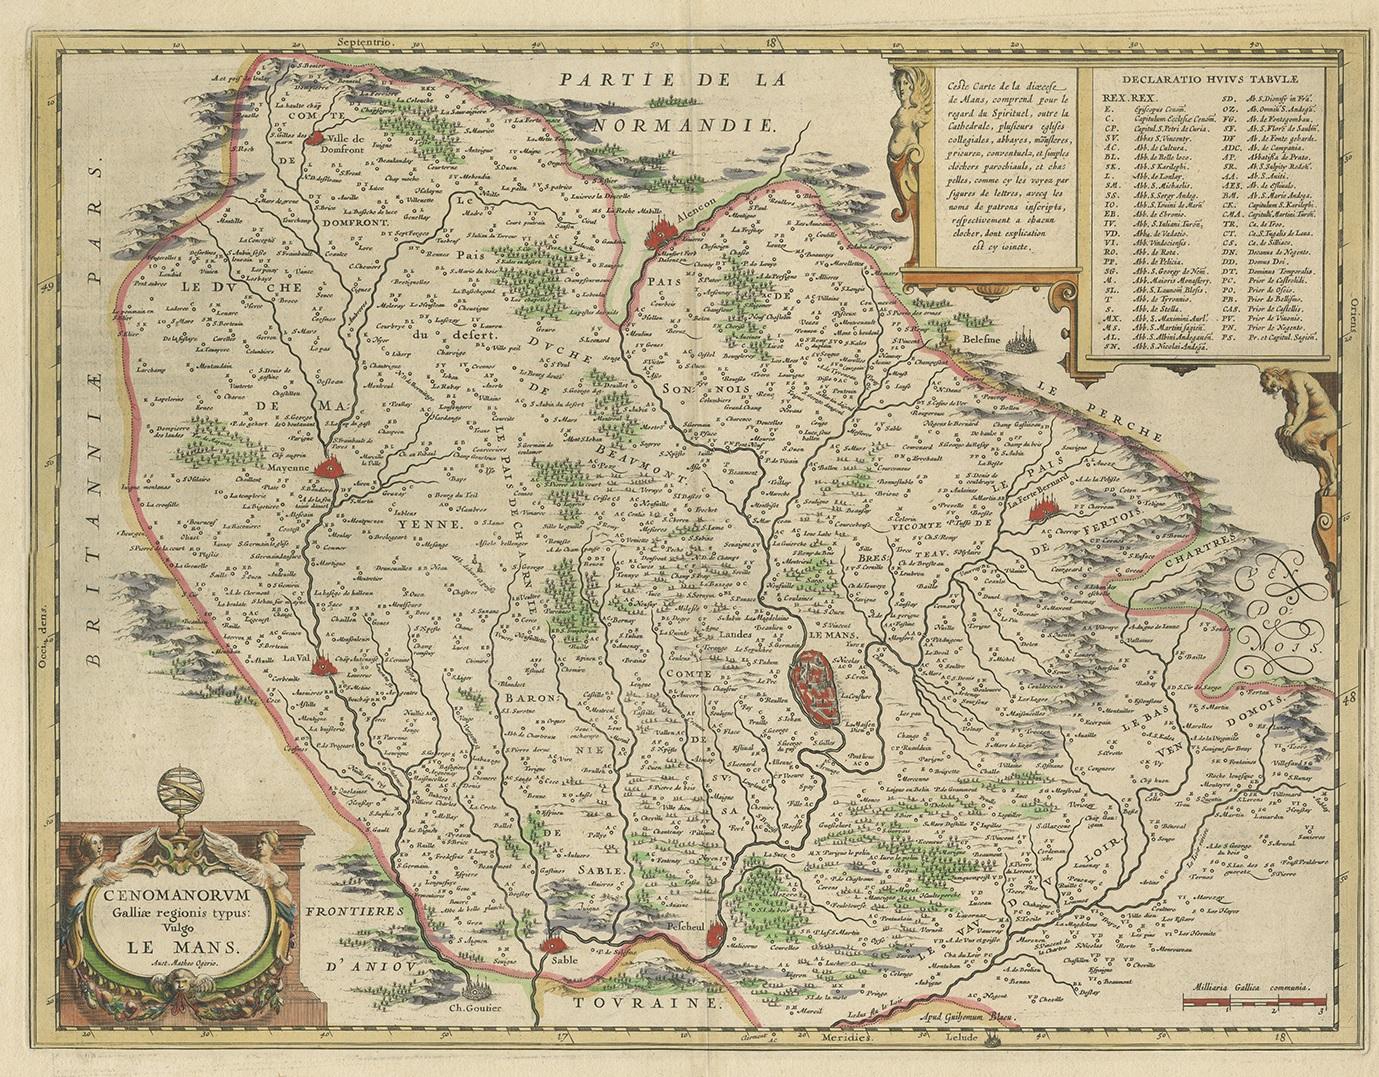 Antique map titled 'Cenomanorum Galliae regionis typus vulgo le Mans'. This lovely map of the historical province of Maine is centered on the famous city of Le Mans. This region witnessed frequent sieges and battles throughout history, as evidenced